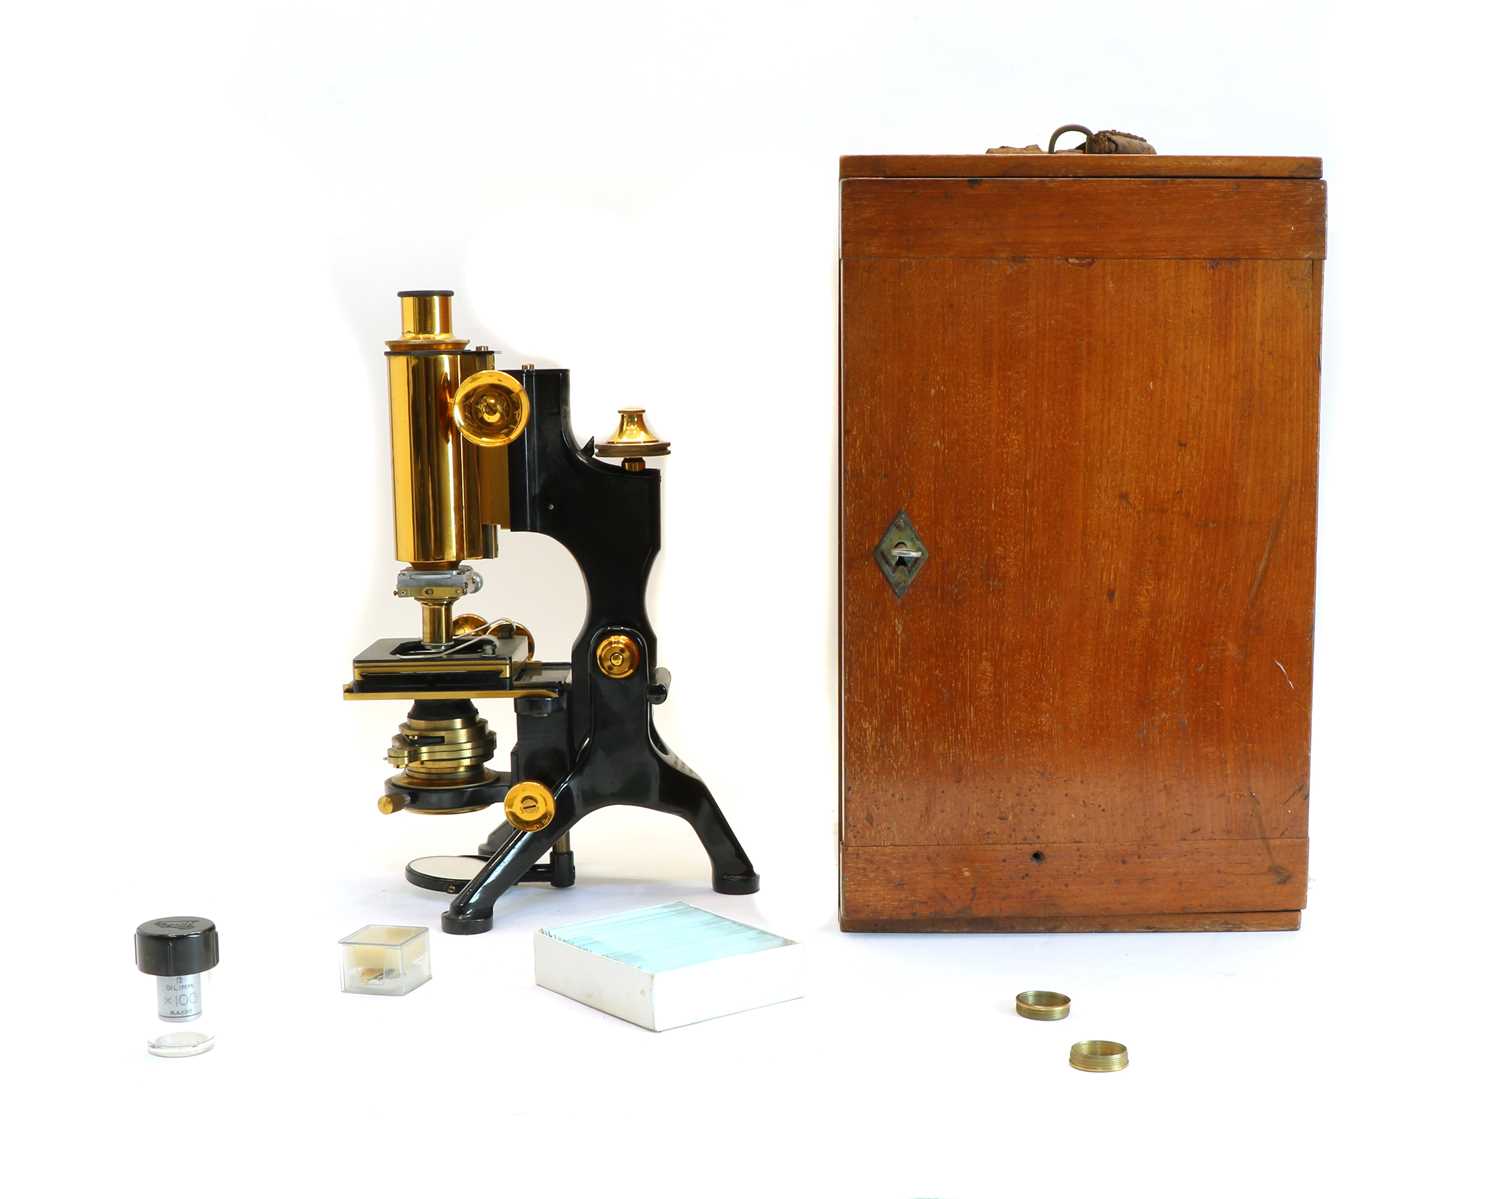 Lot 235 - A black and lacquered compound brass monocular microscope